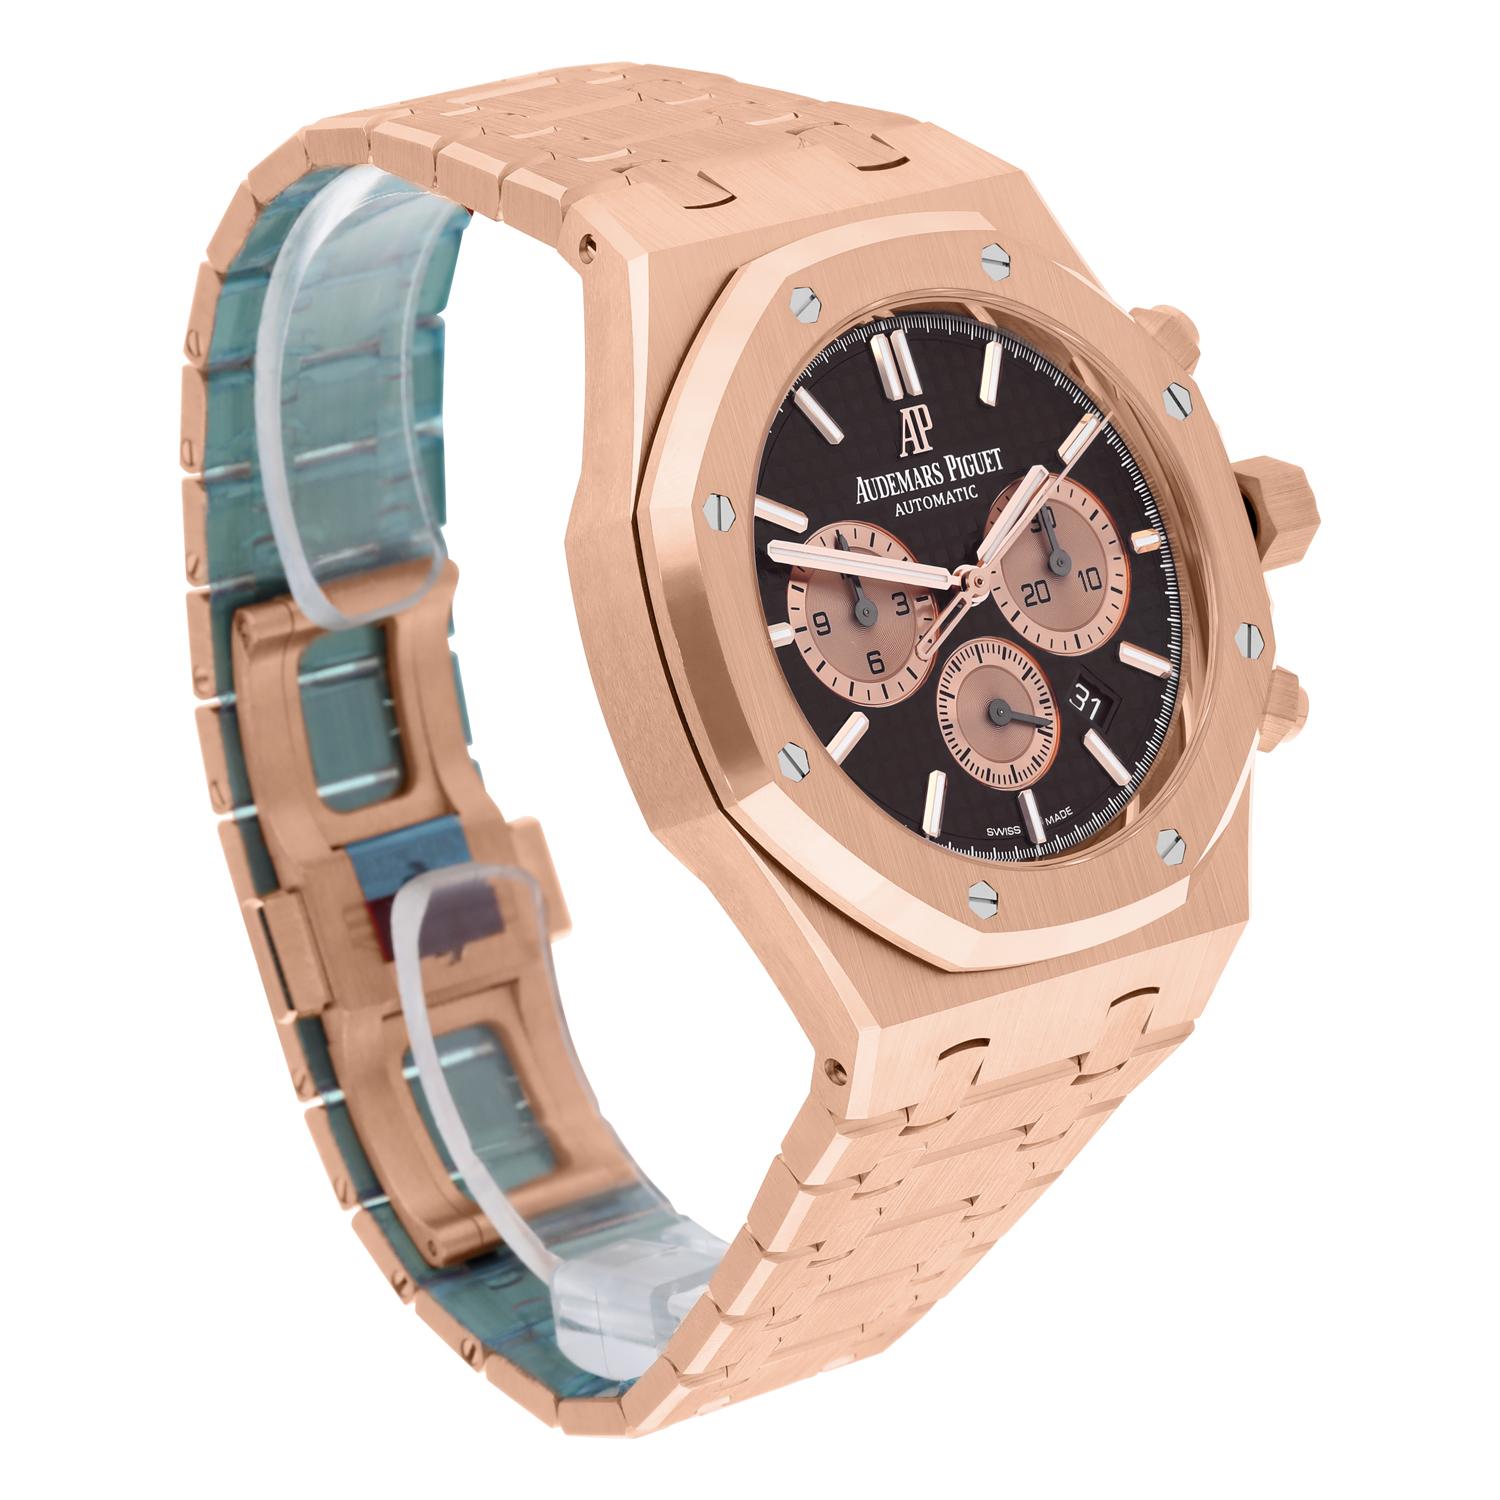 Audemars Piguet Royal Oak Chronograph Chocolate 26331OR.OO.1220OR.02 NEW For Sale 2